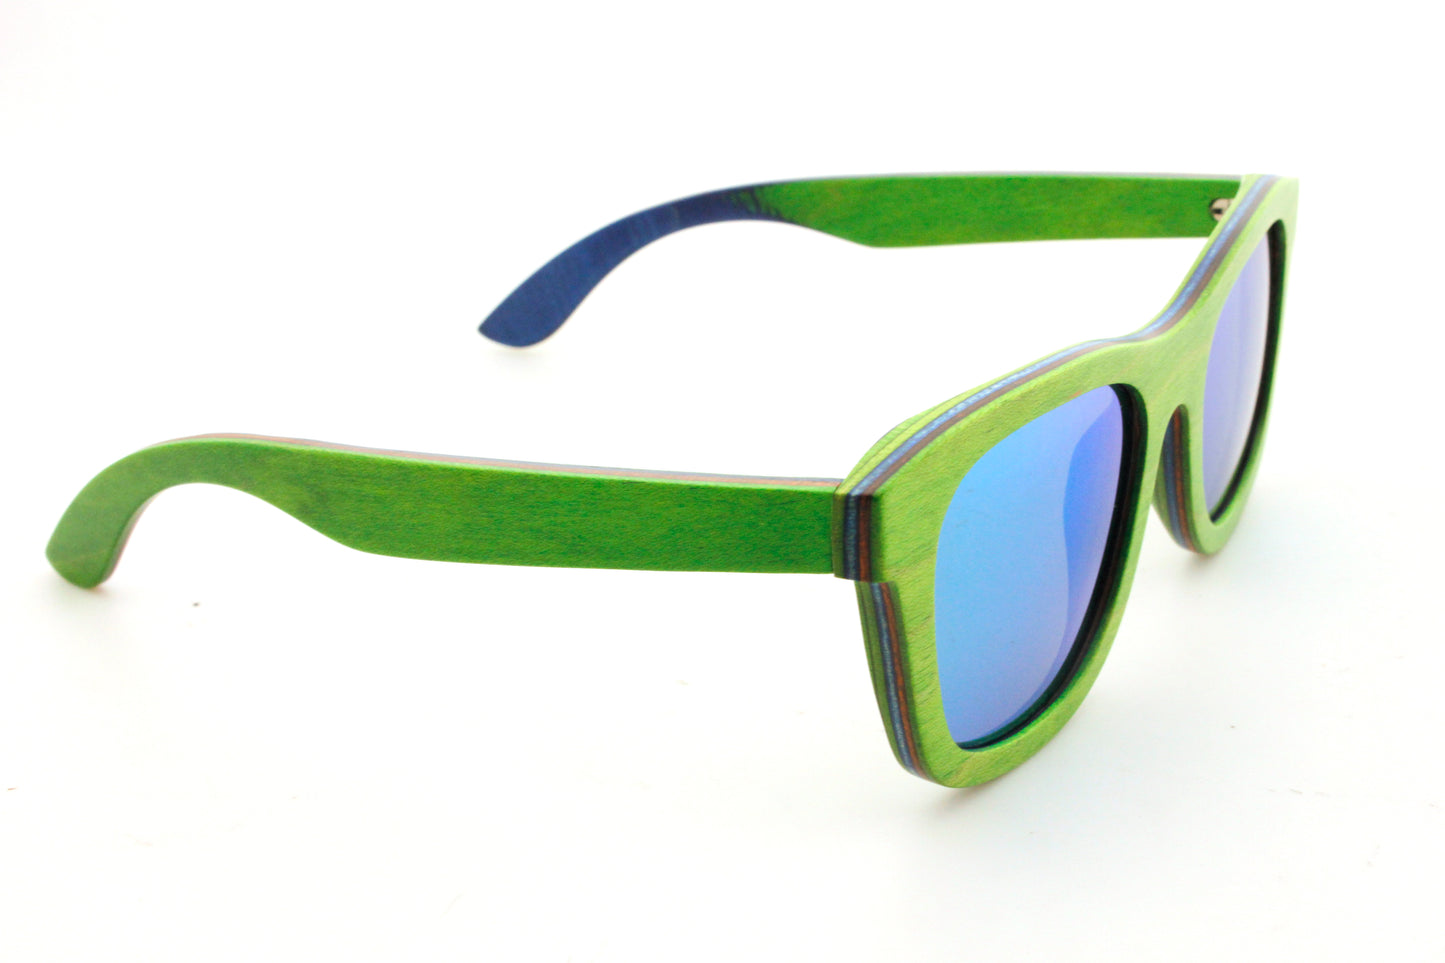 Quarter bamboo wood sunglasses view from the right